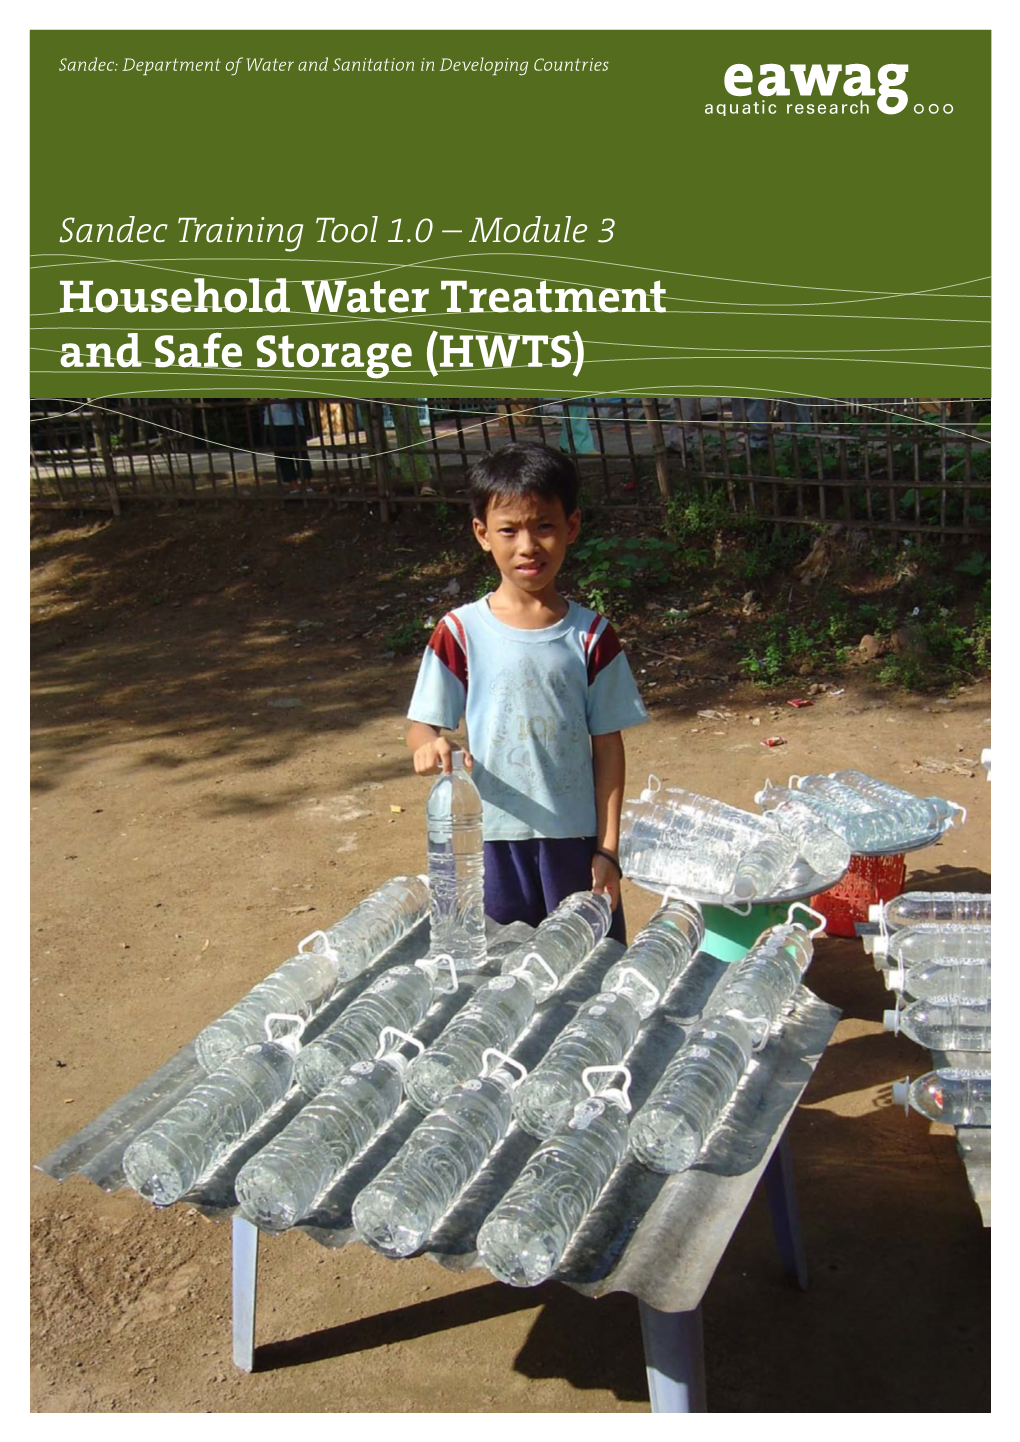 Household Water Treatment and Safe Storage (HWTS) Summary